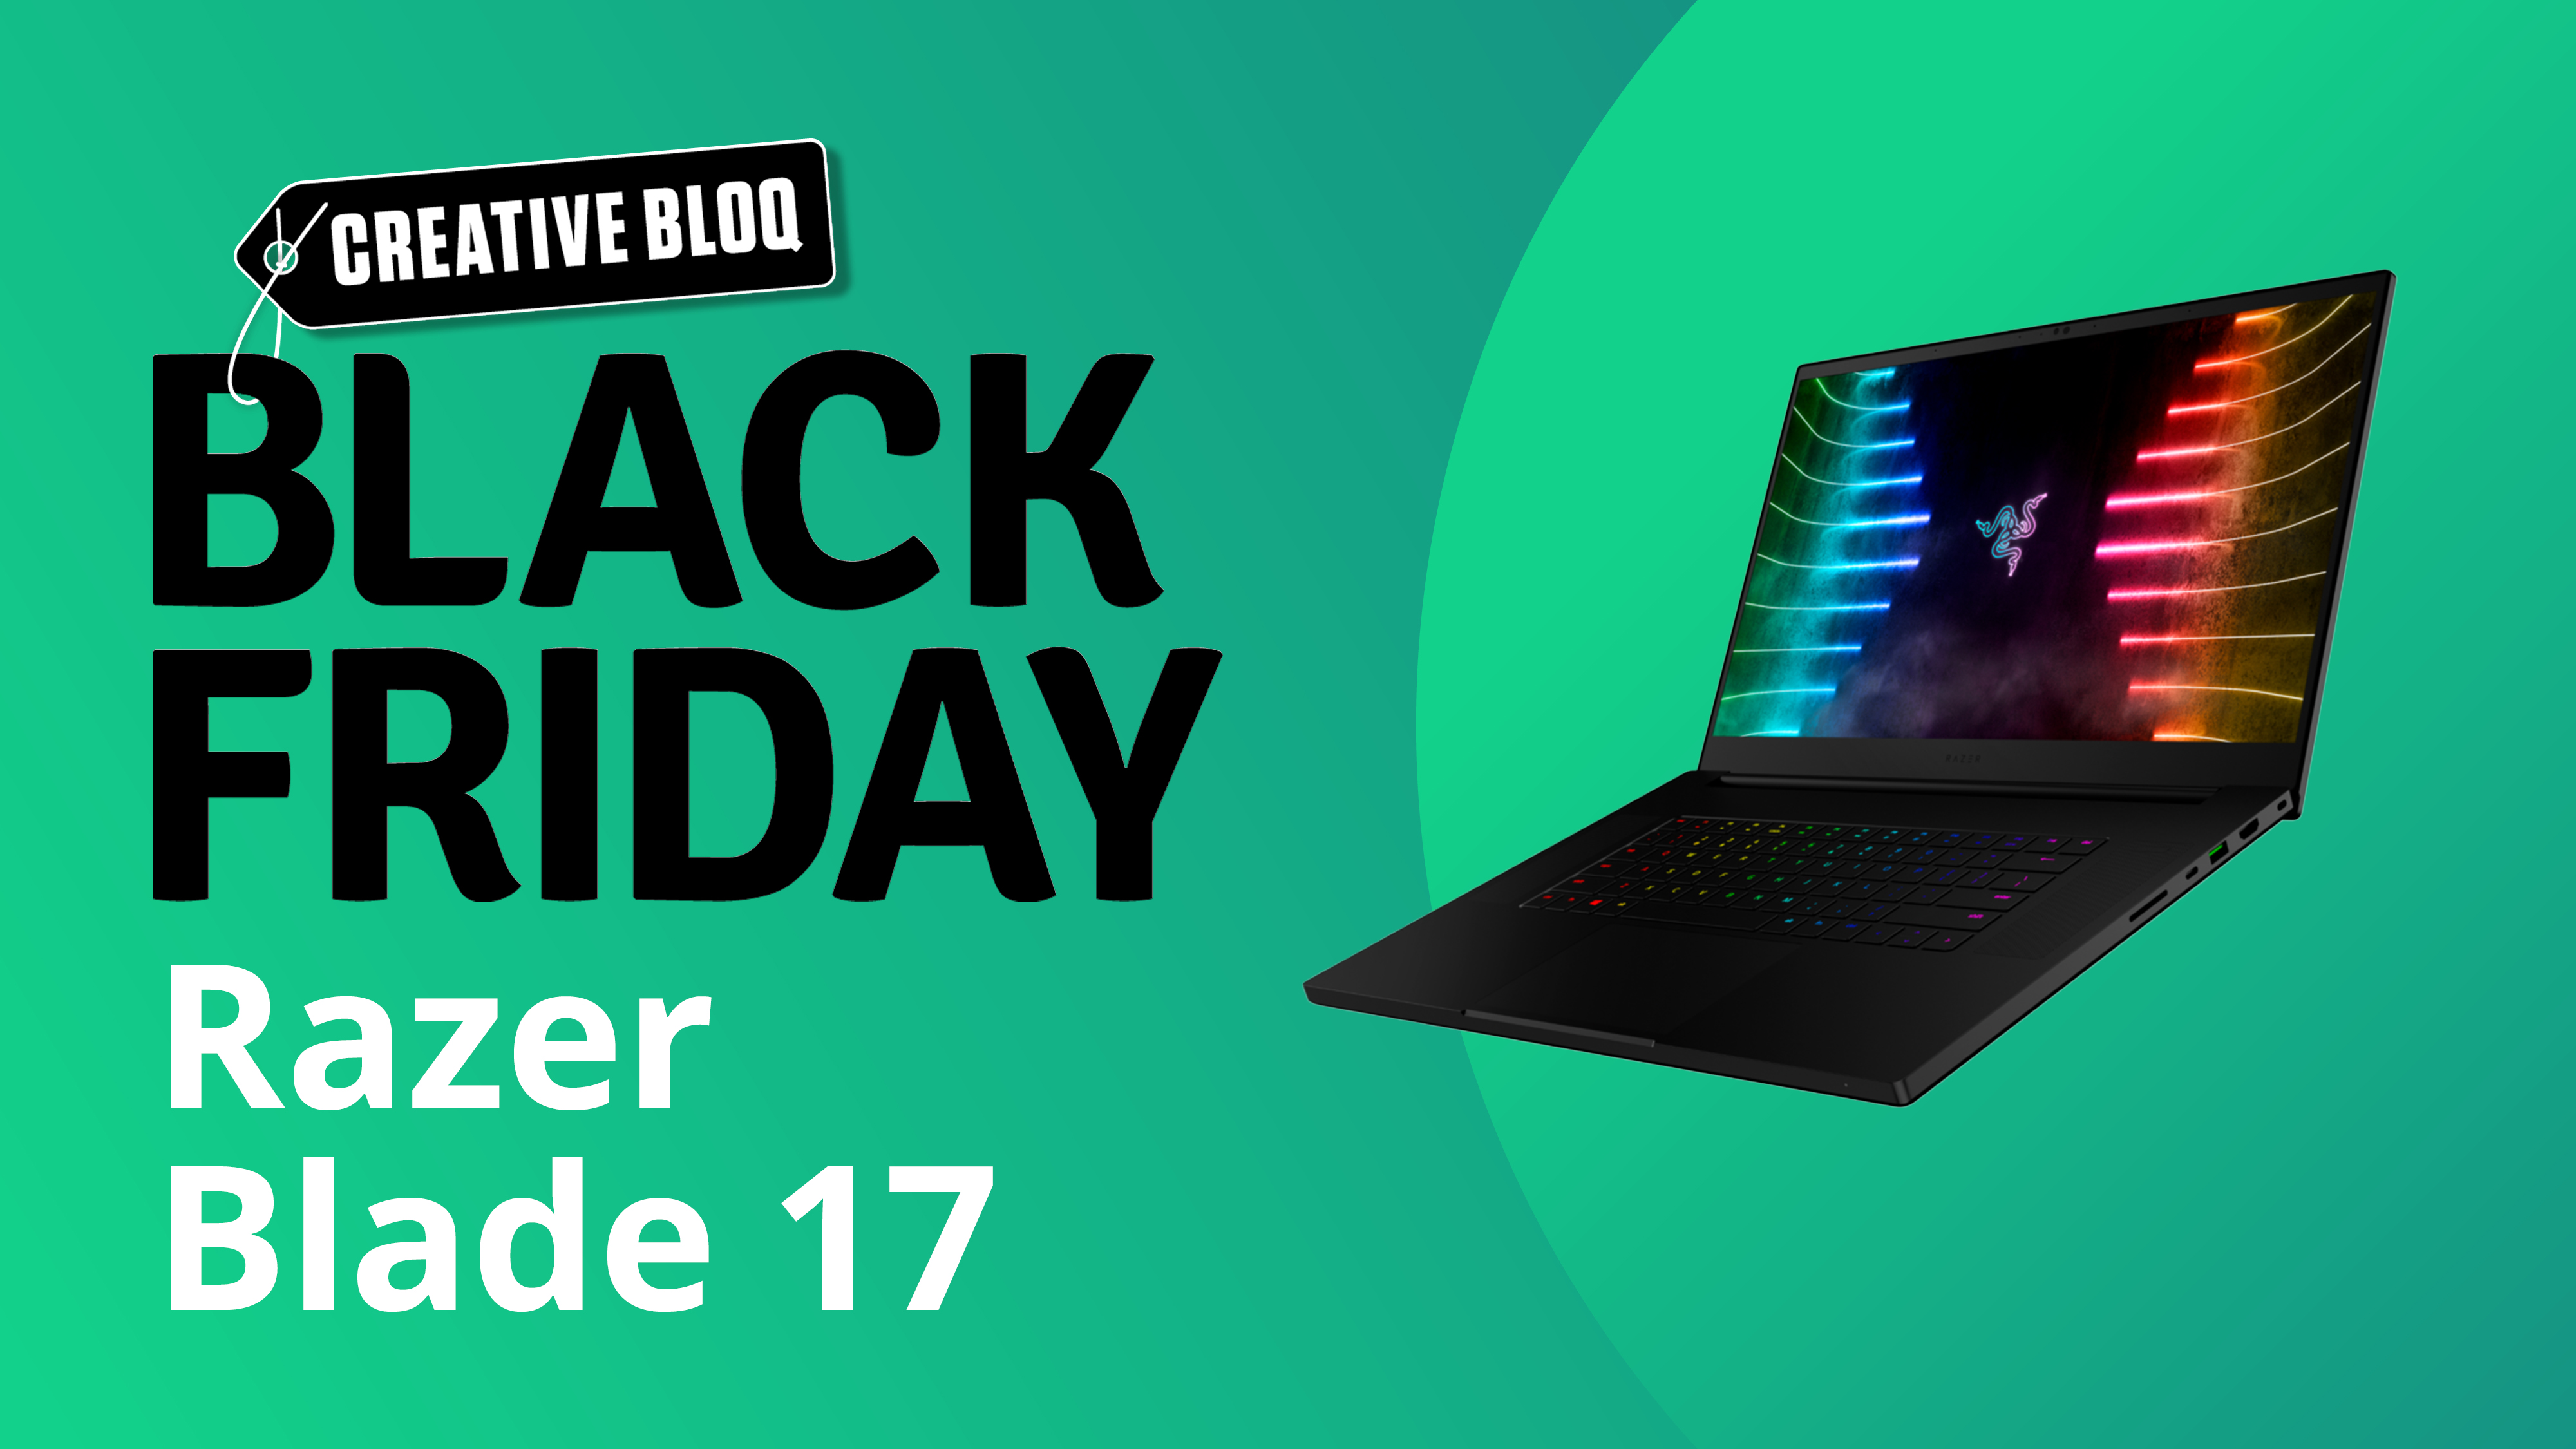 An image of Razer Black Friday deals, featuring a Razer Blade 17 against a green background